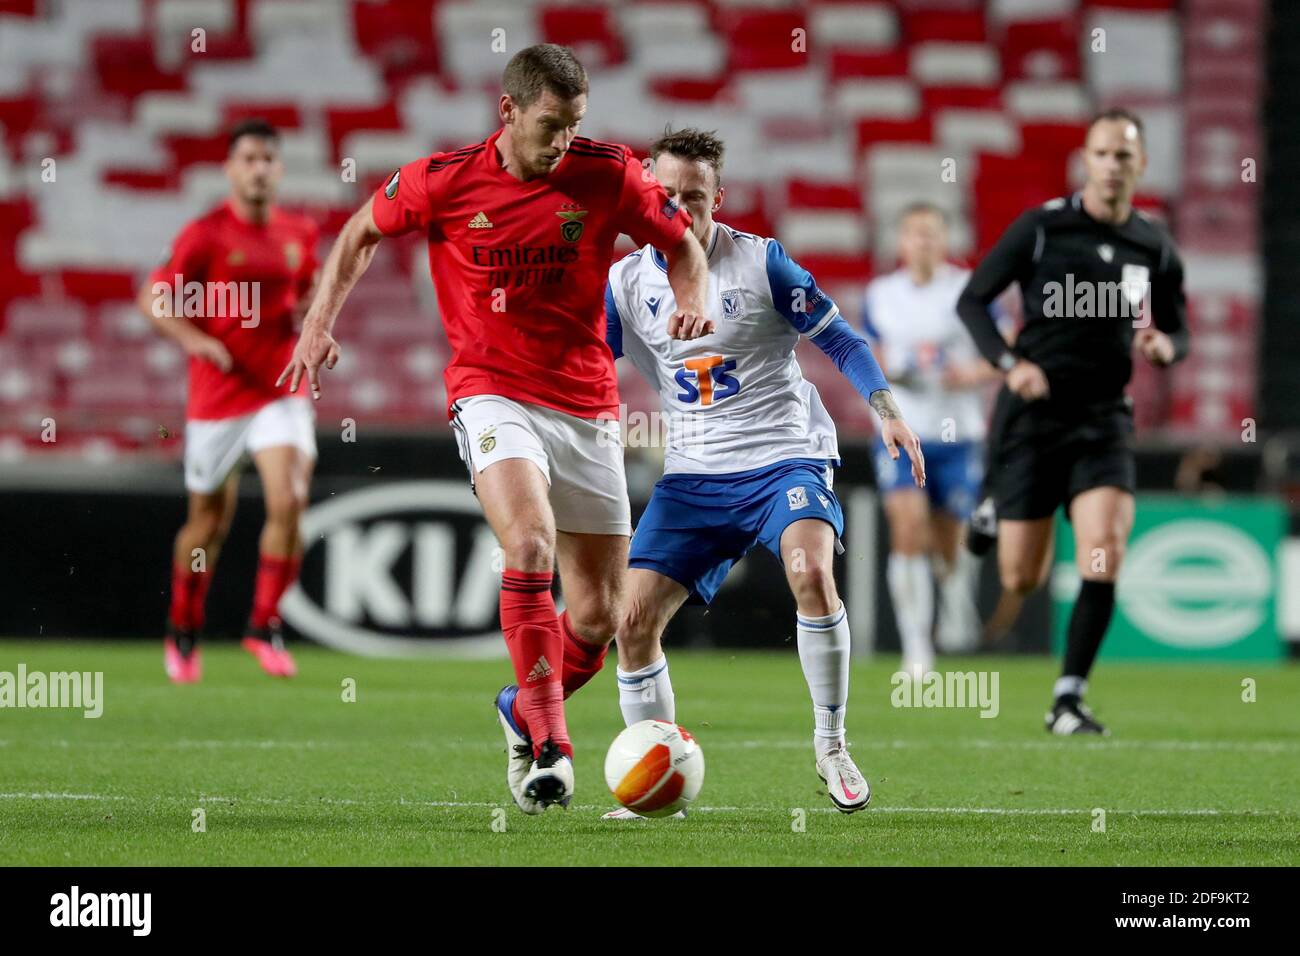 Lisbon, Portugal. 3rd Dec, 2020. Jan Vertonghen of SL Benfica (L) vies with Jan Sykora of Lech Poznan during the UEFA Europa League Group D football match between SL Benfica and Lech Poznan at the Luz stadium in Lisbon, Portugal on December 3, 2020. Credit: Pedro Fiuza/ZUMA Wire/Alamy Live News Stock Photo